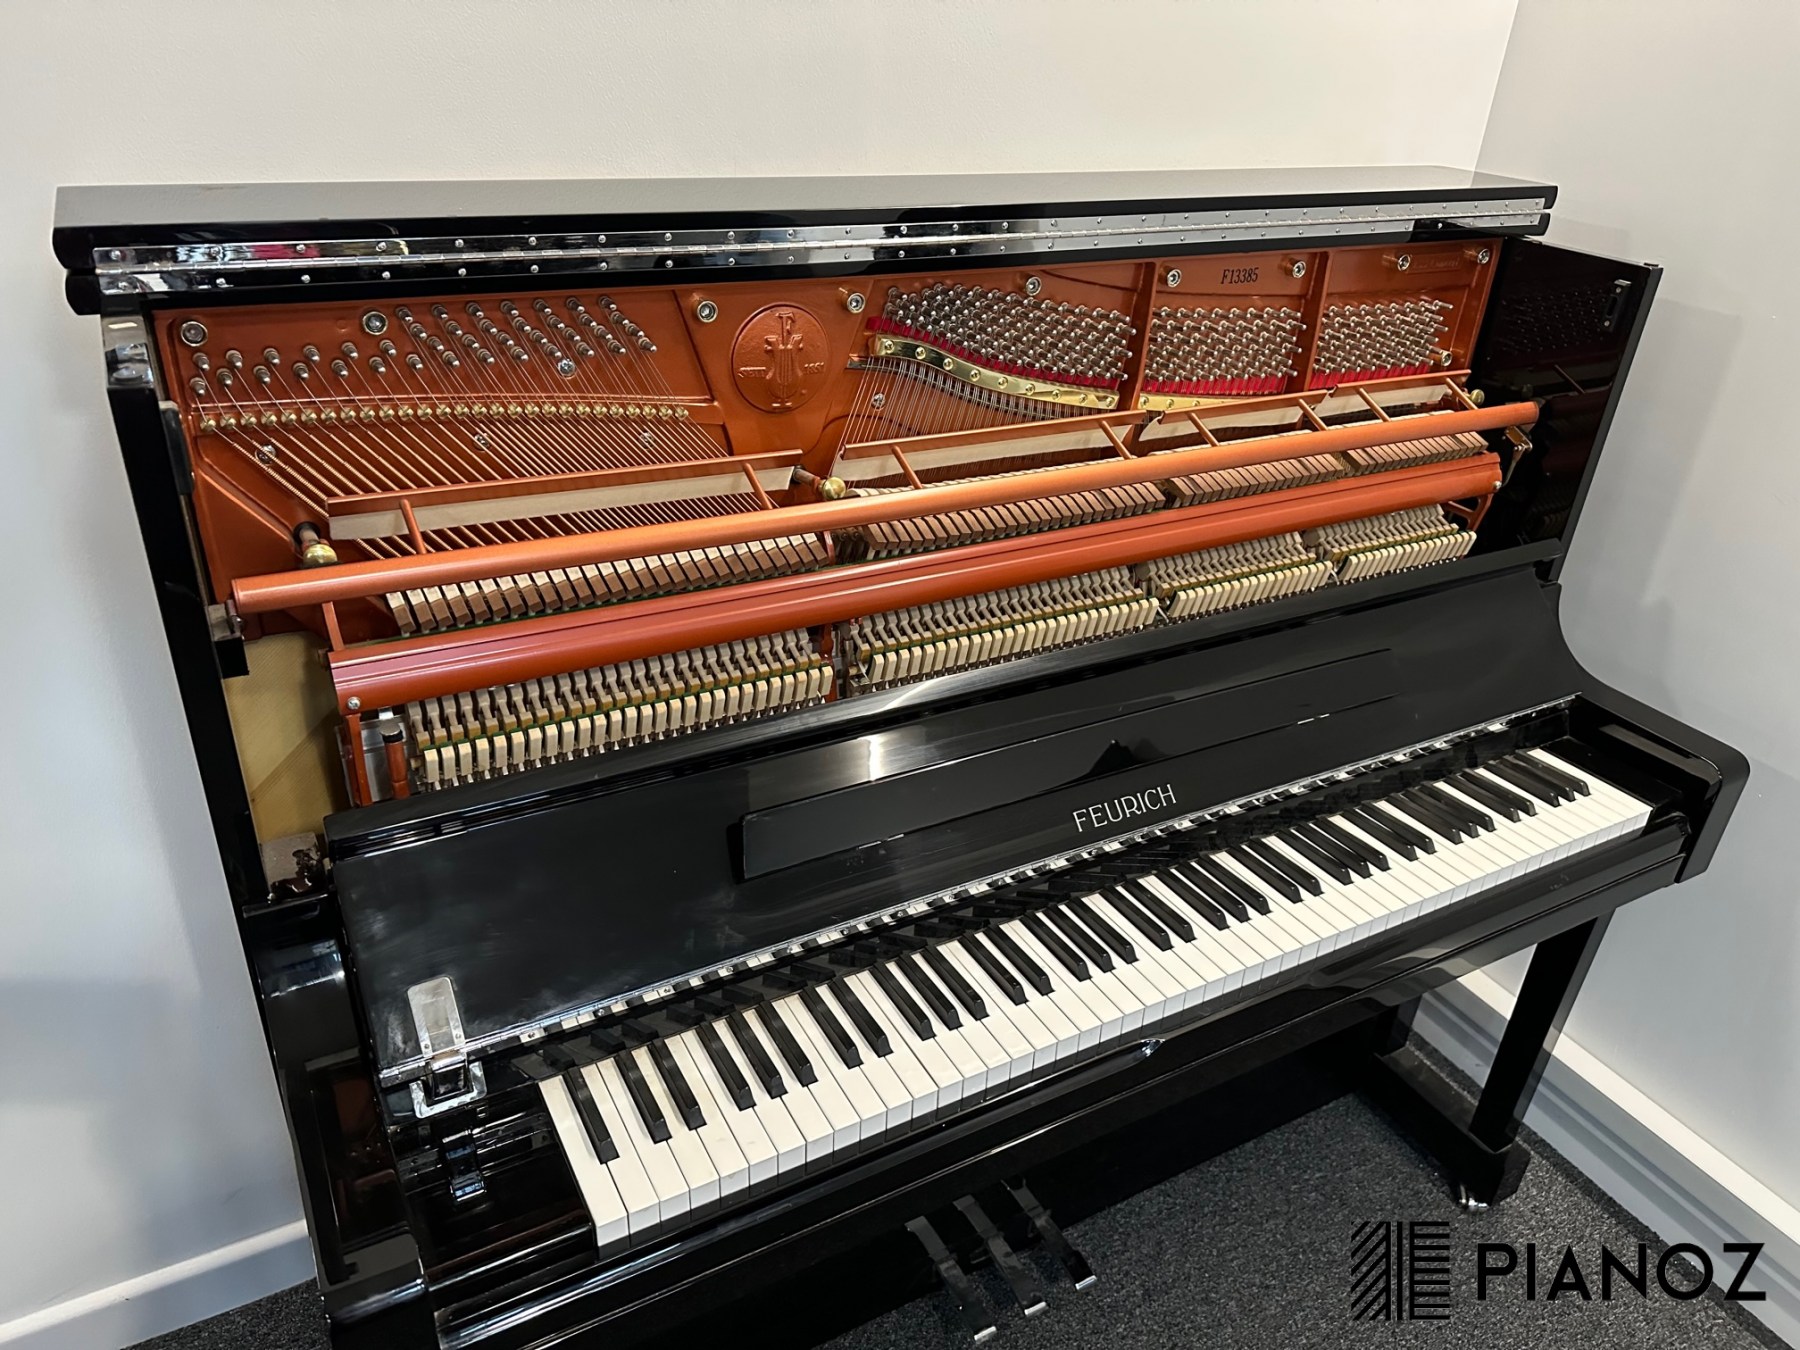 Feurich 133 Concert Upright Piano piano for sale in UK